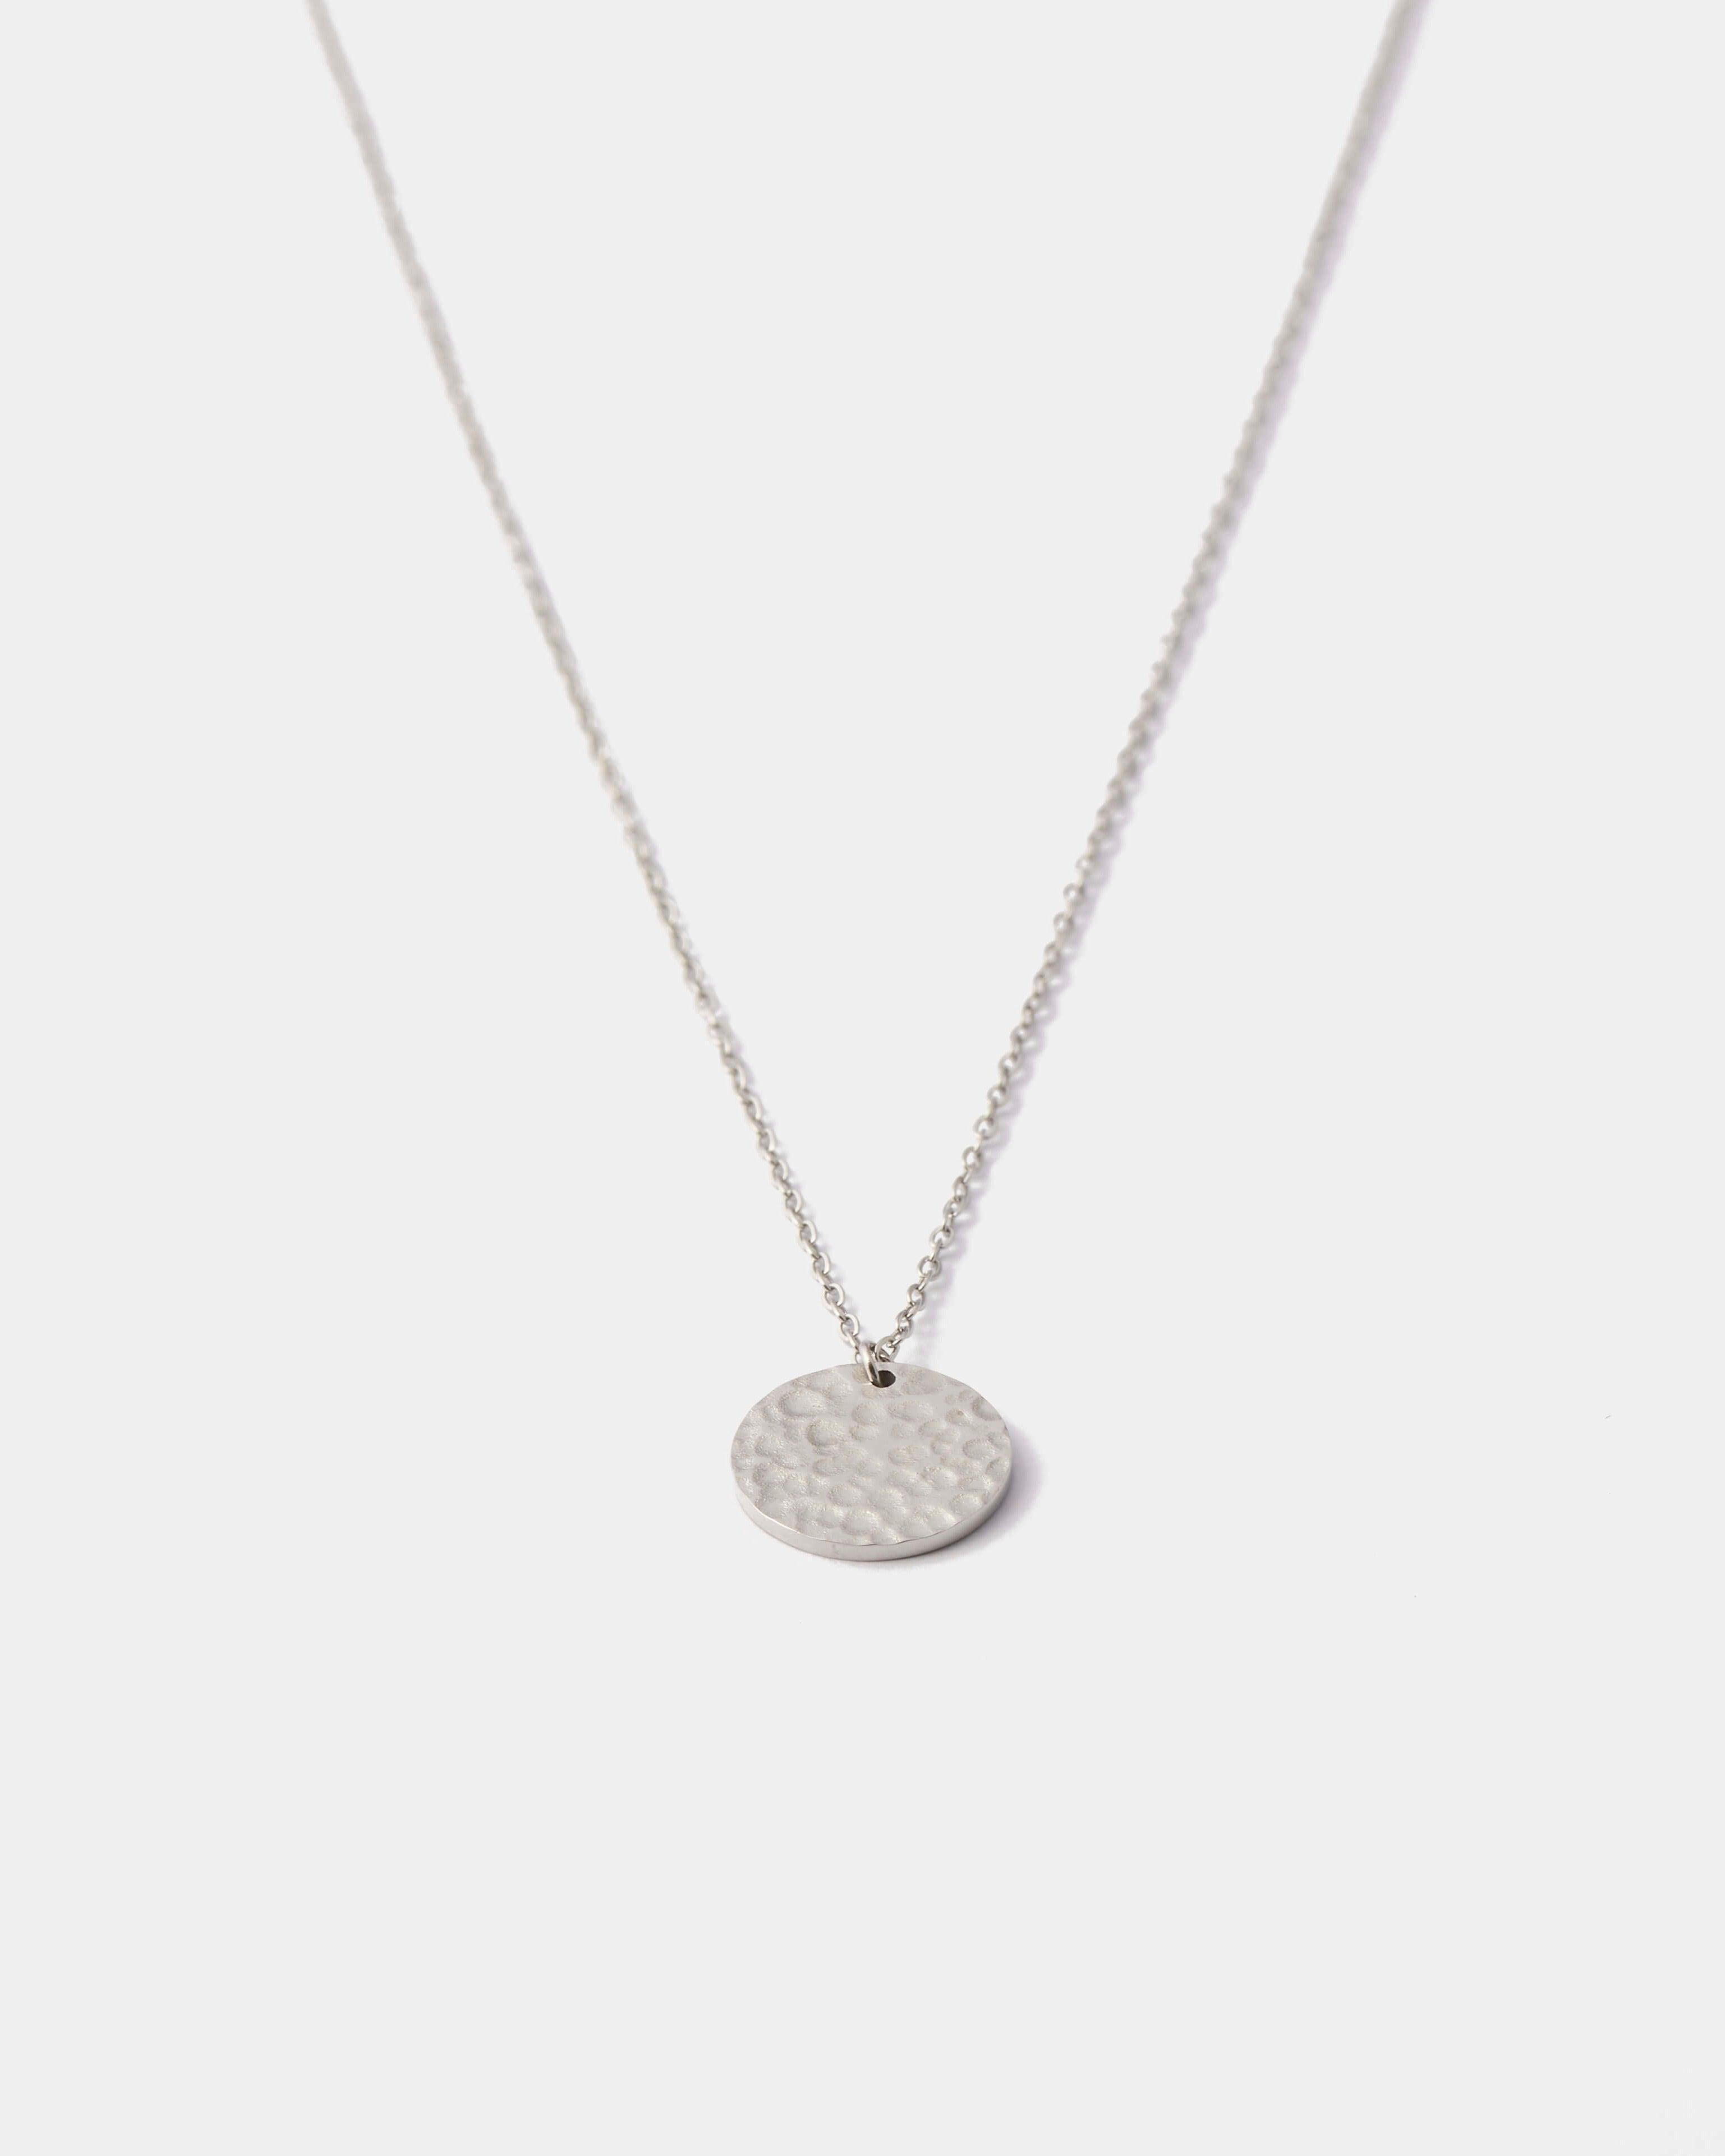 COSMIC DISK NECKLACE - LIMELY